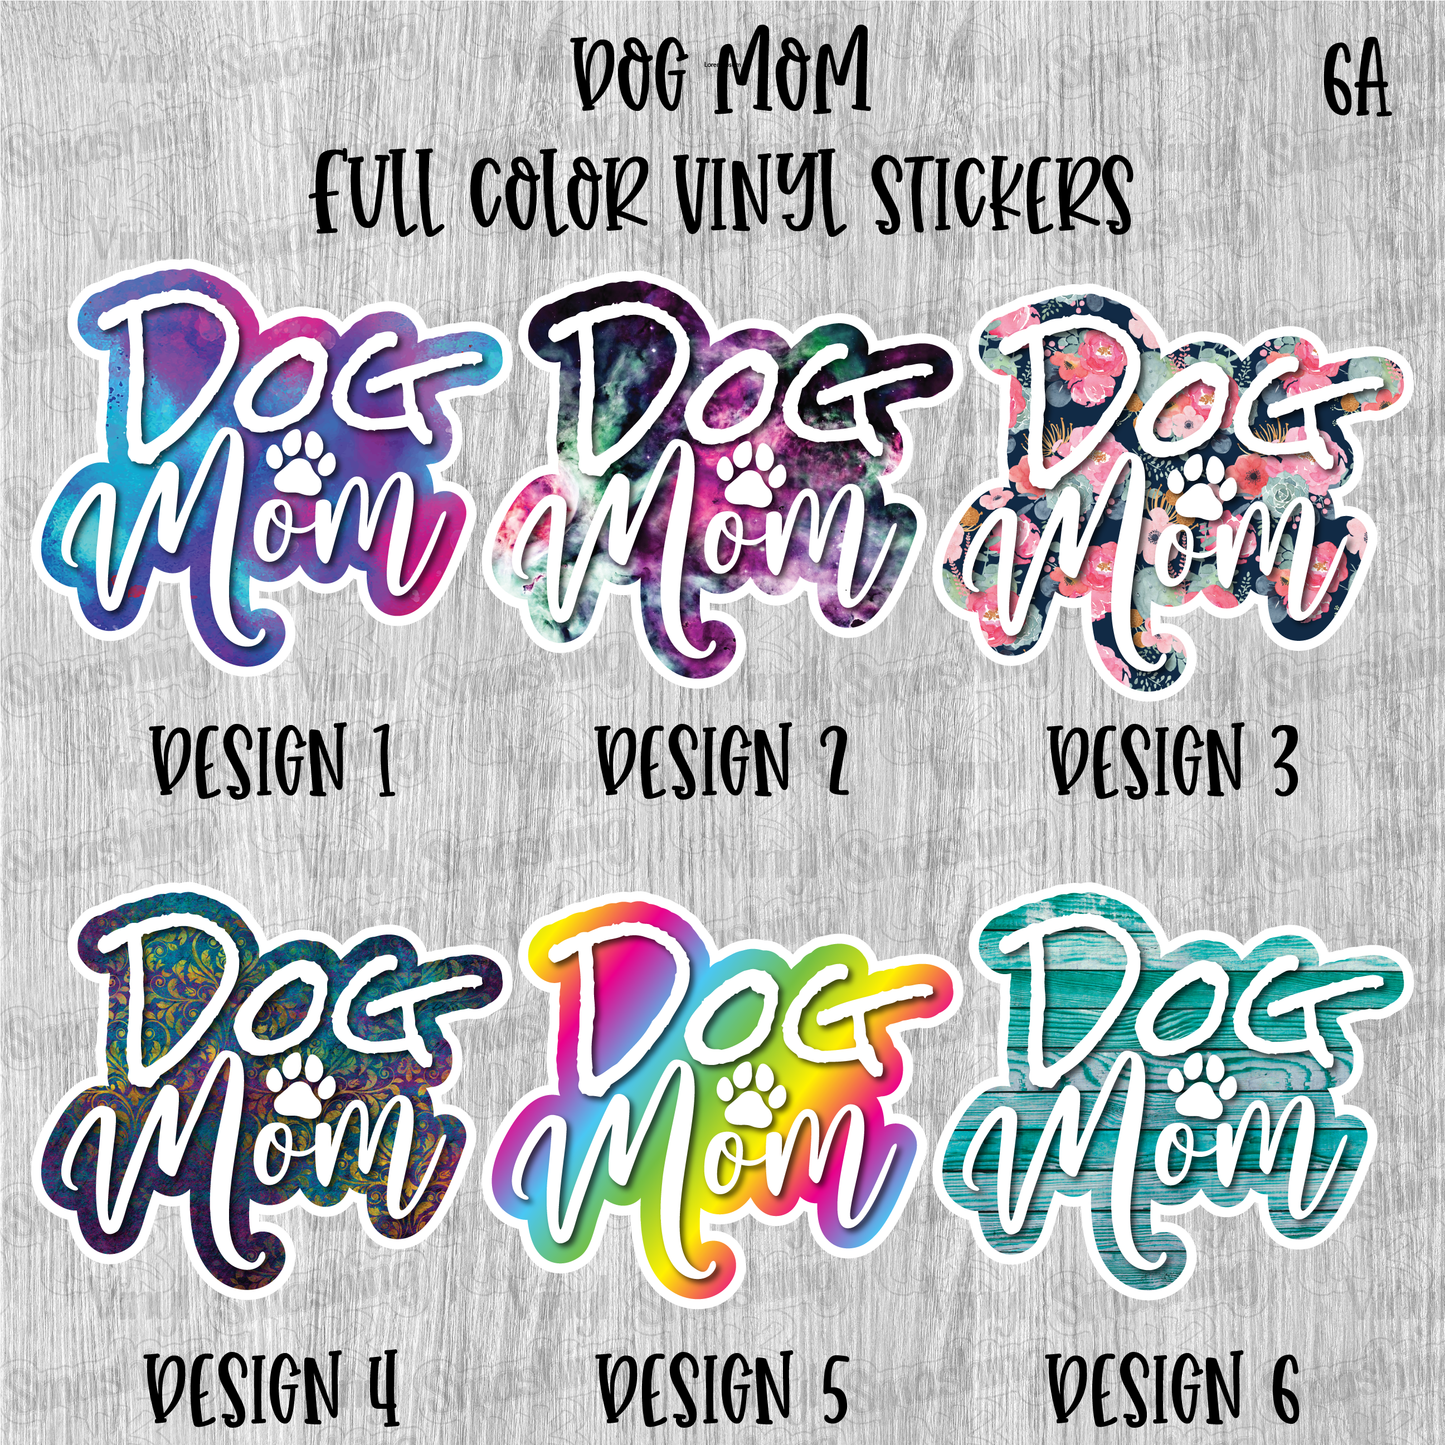 Dog Mom - Full Color Vinyl Stickers (SHIPS IN 3-7 BUS DAYS)